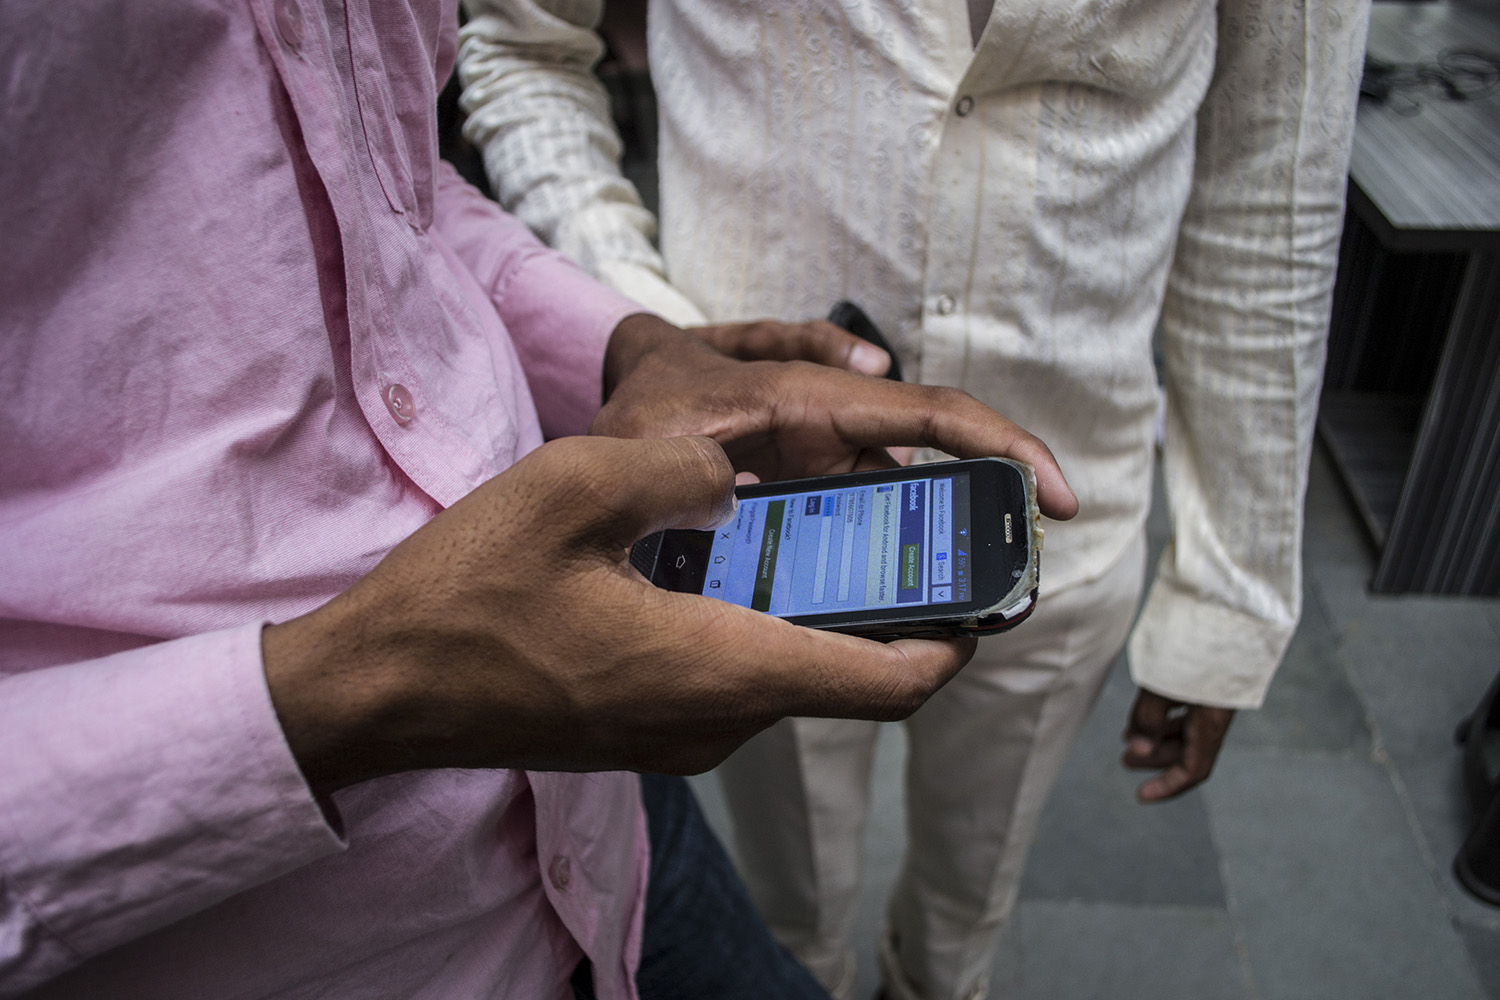 The area around the CIRC has become a Wi-Fi access hub for villagers. Photo: Mubeen Siddiqui